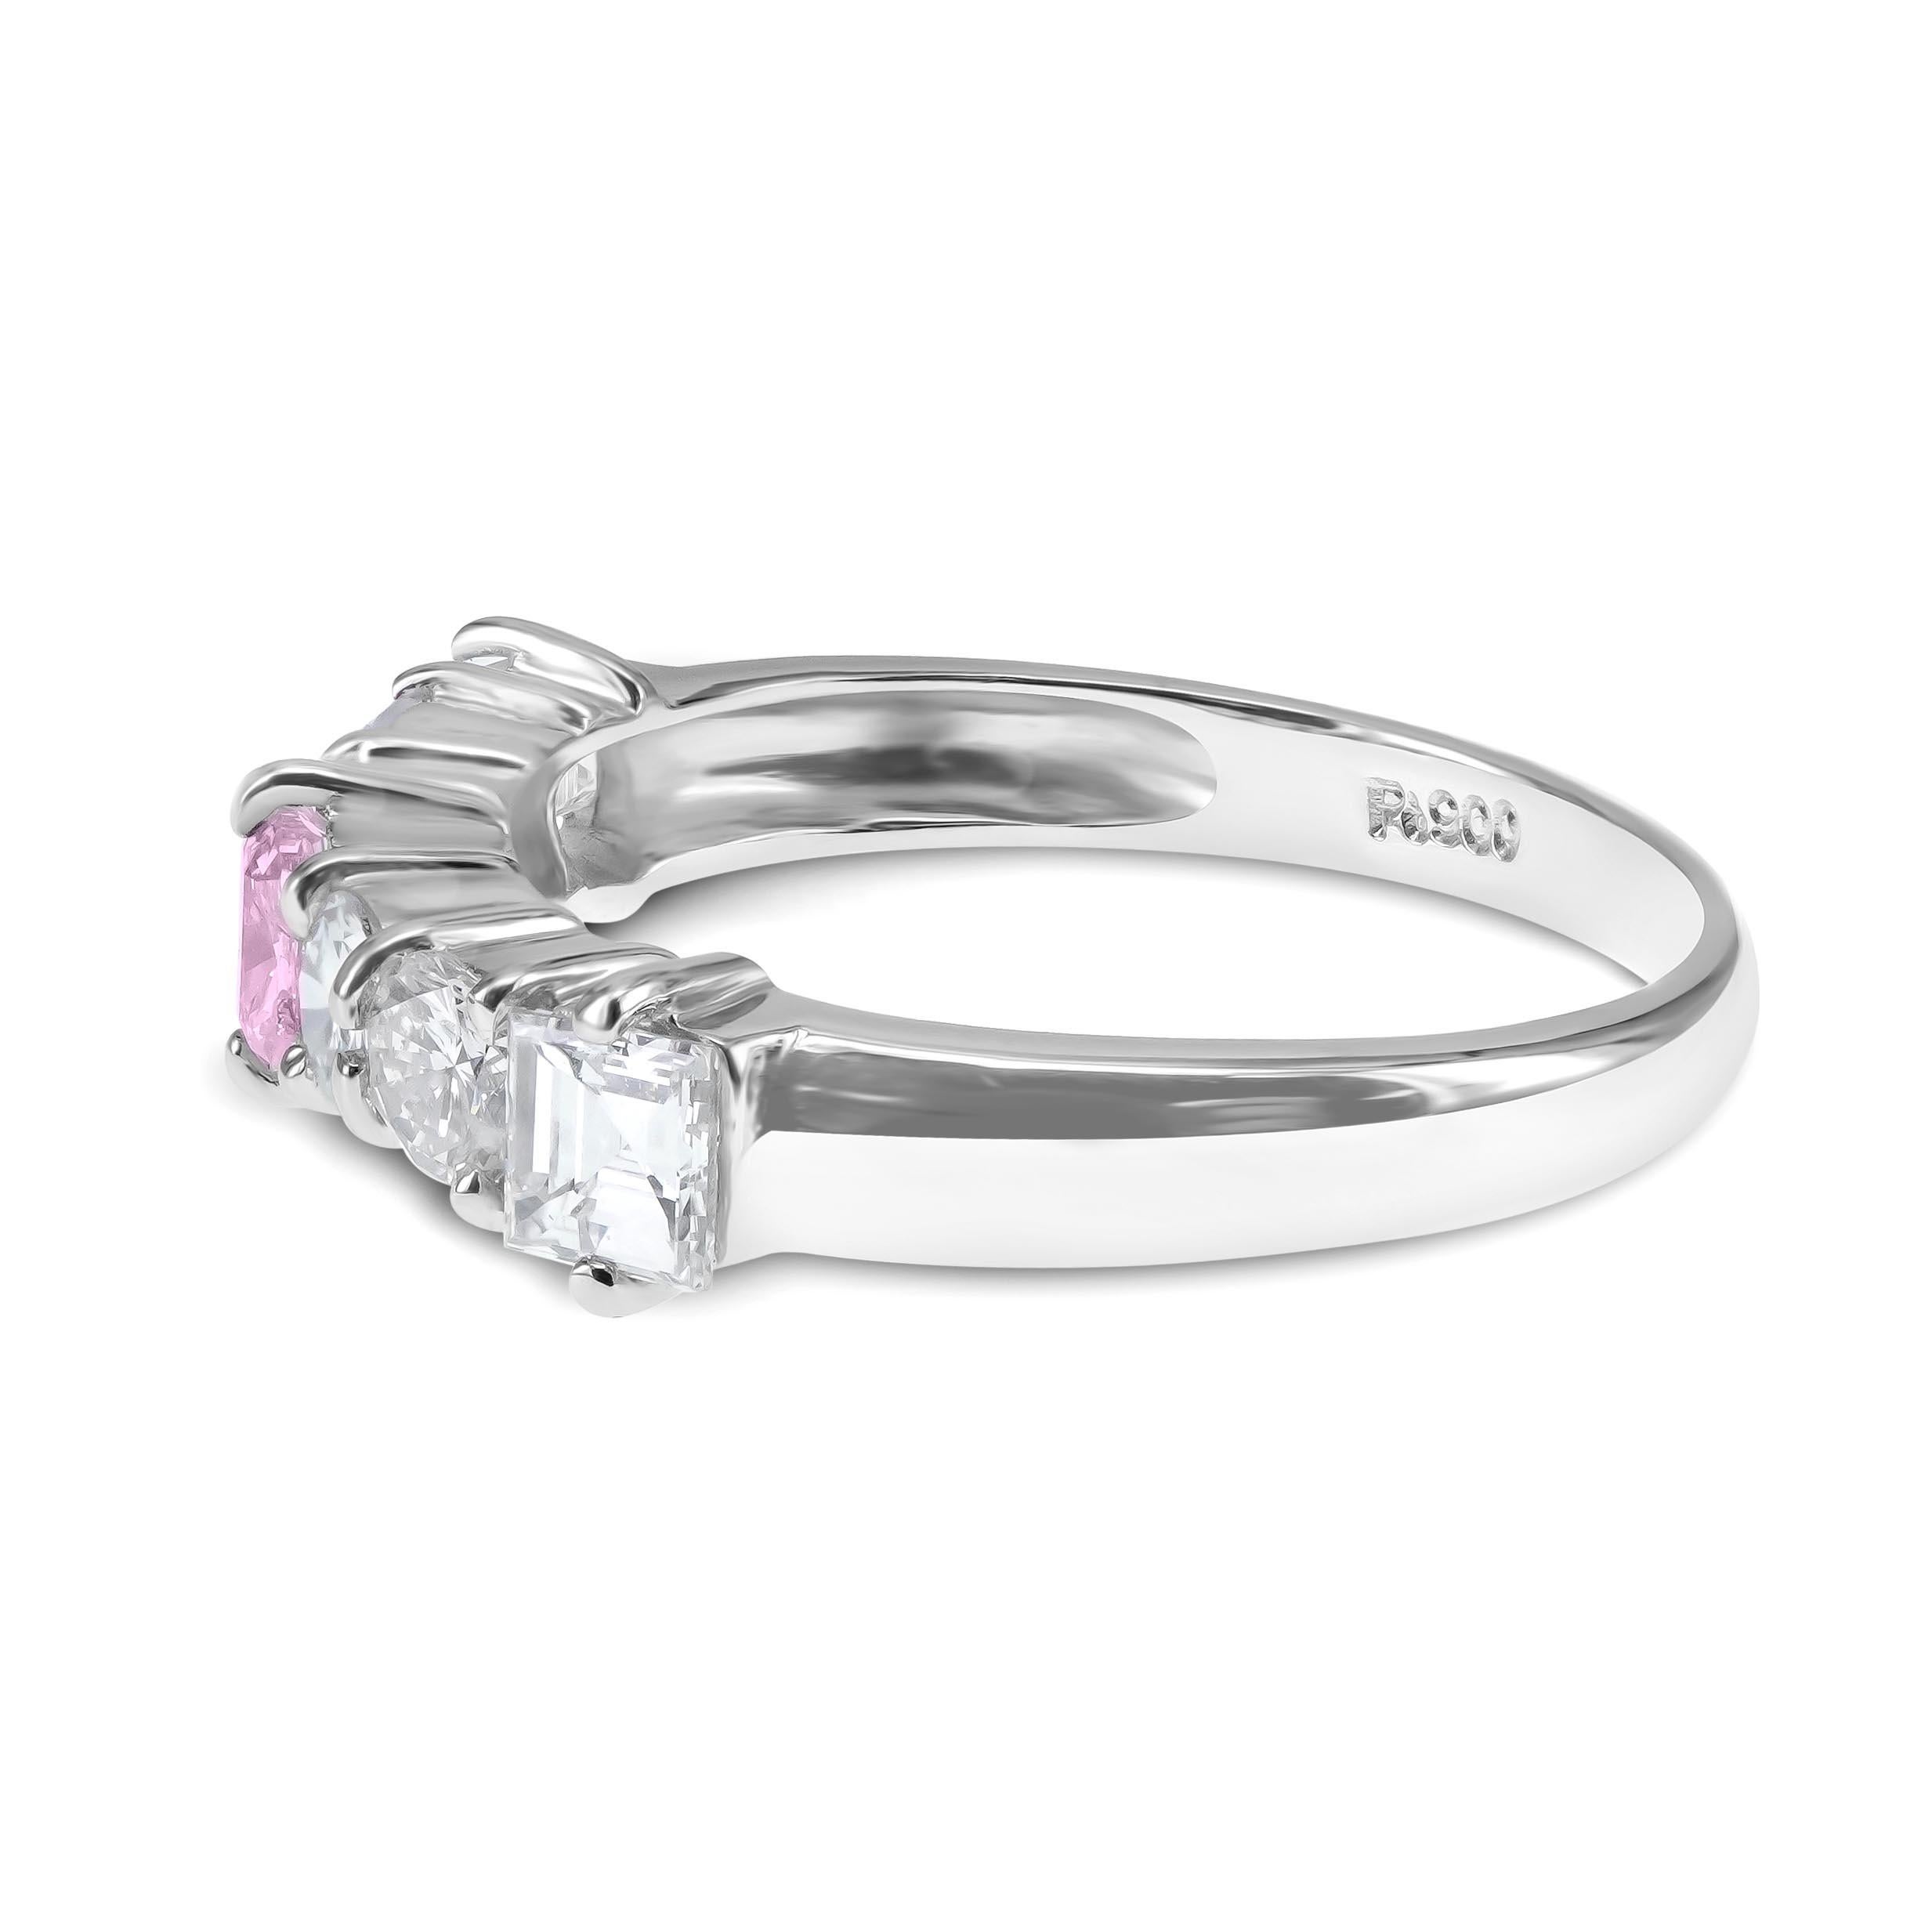 A CGL Certified 0.19 carat Fancy Pink Diamond is set along with 0.82 carat of white brilliant round and radiant cut diamond. Pink diamonds are some of the most alluring fancy diamonds on the market. Due to their extreme rarity, pink diamonds are